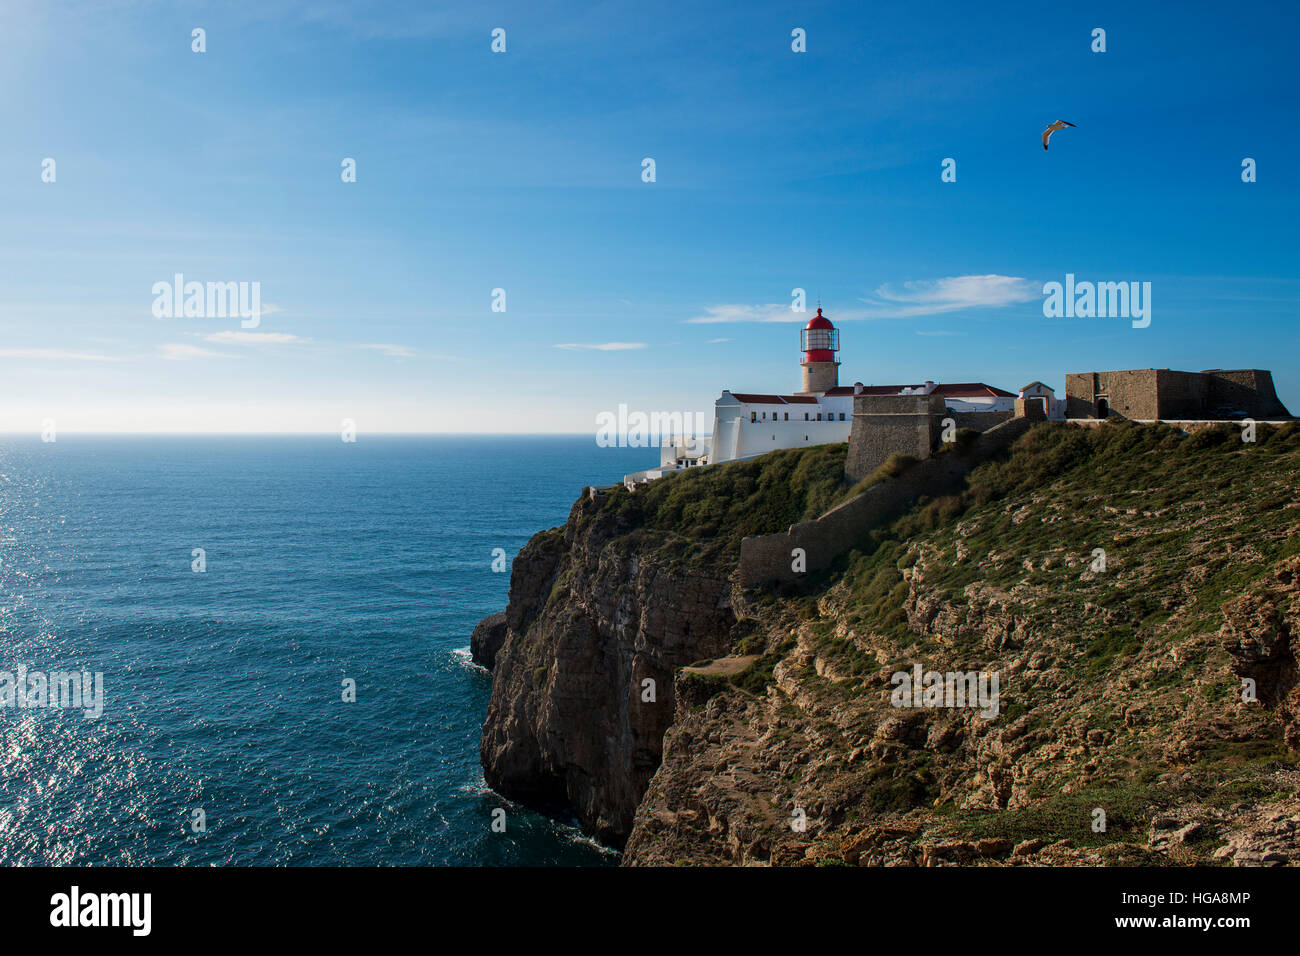 View of the Lighthouse at the Saint Vincent Cape (Cabo de Sao Vincente) in Sagres, Algarve, Portugal; Concept for travel in Portugal Stock Photo